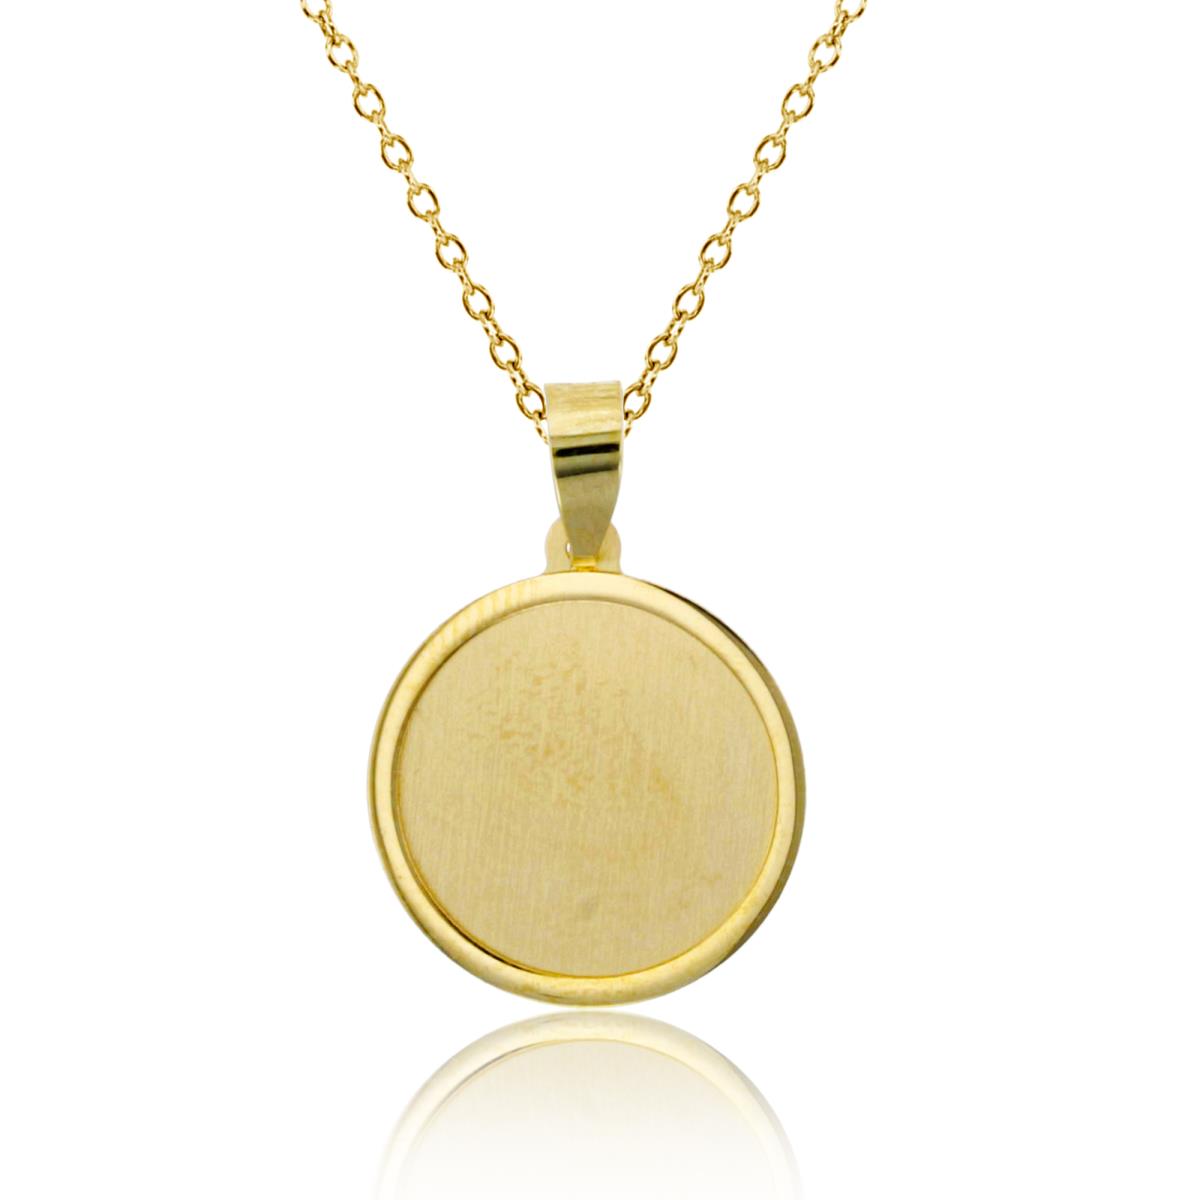 10K Yellow Gold 21x14mm Satin Engravable Medallion 18" Necklace